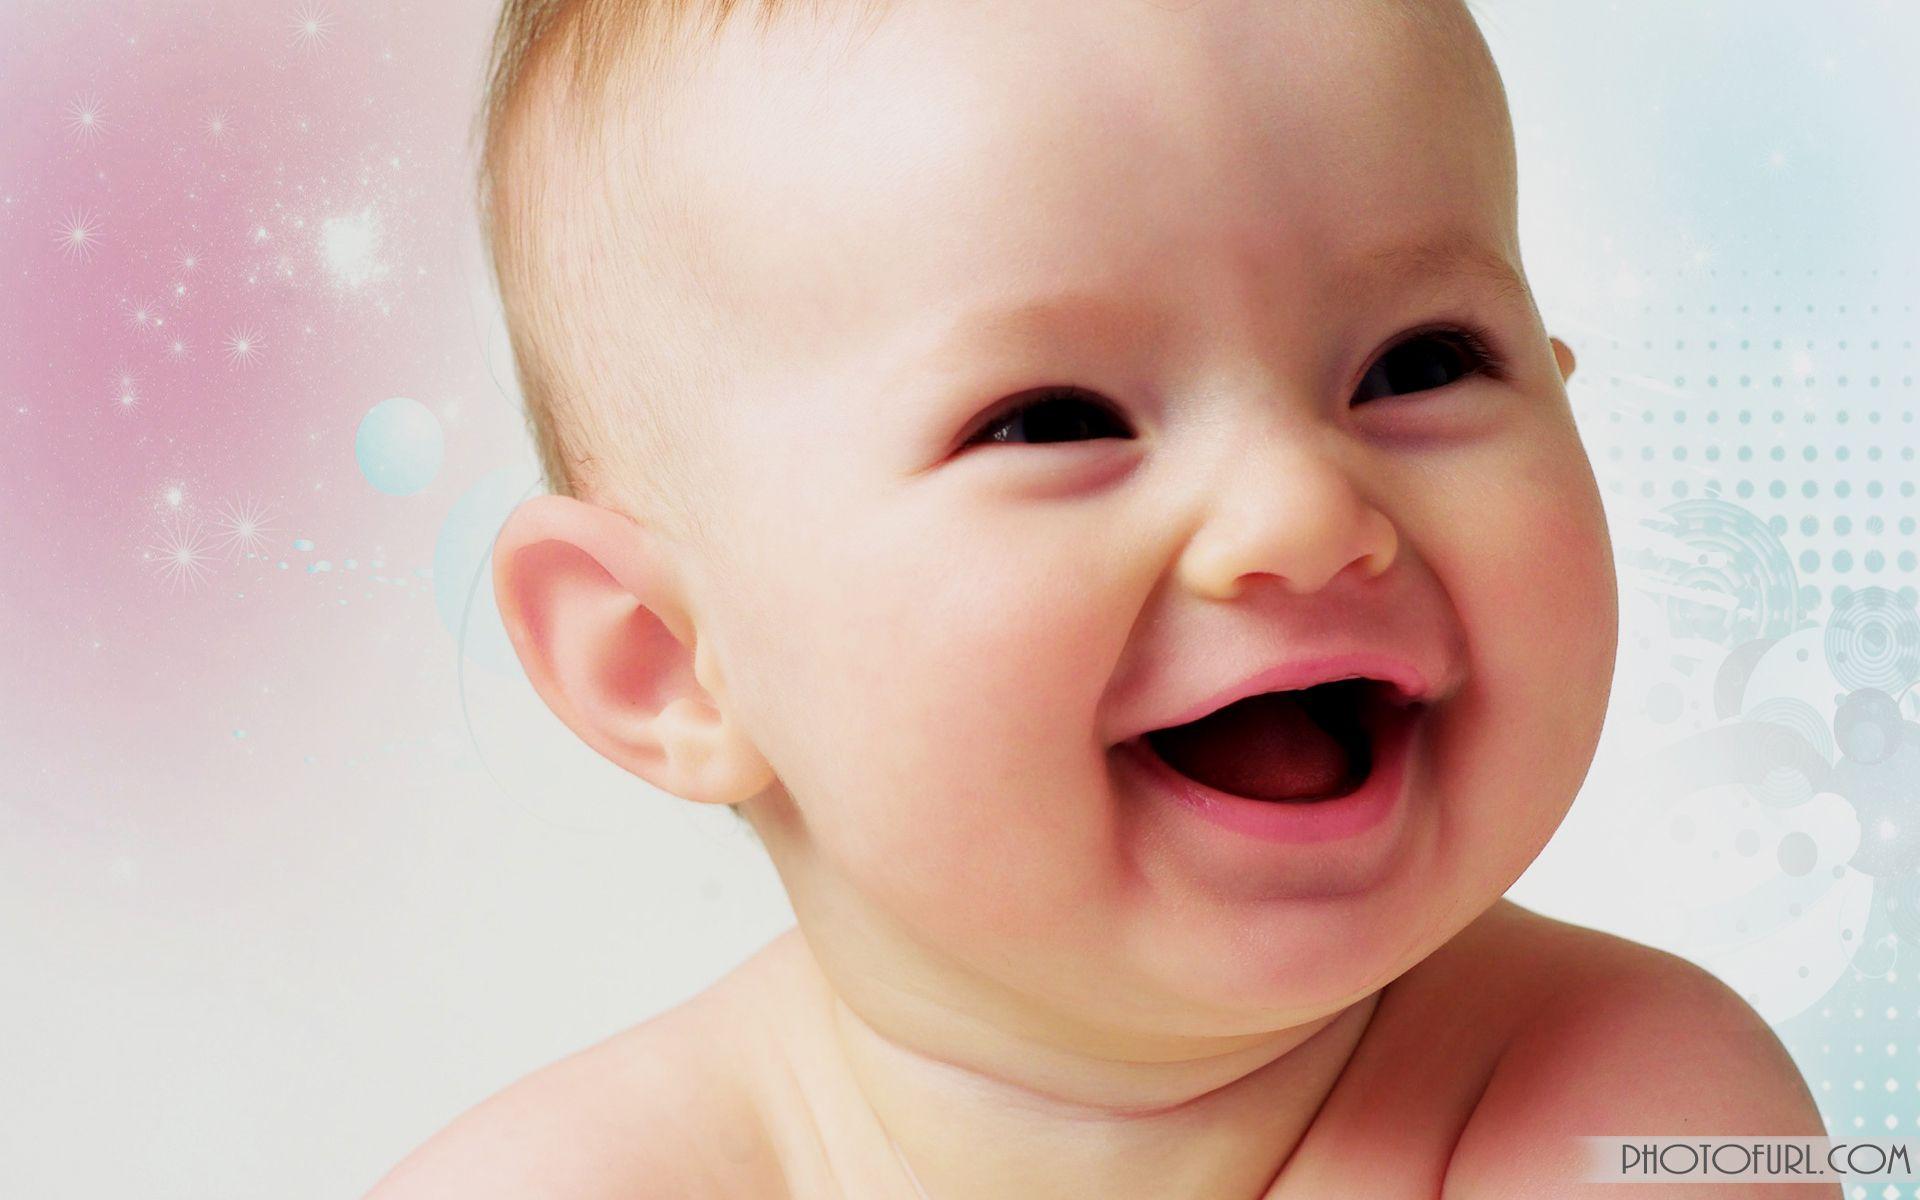 Beautiful Baby Girl with Two Teeth Smile Photo | HD Wallpapers